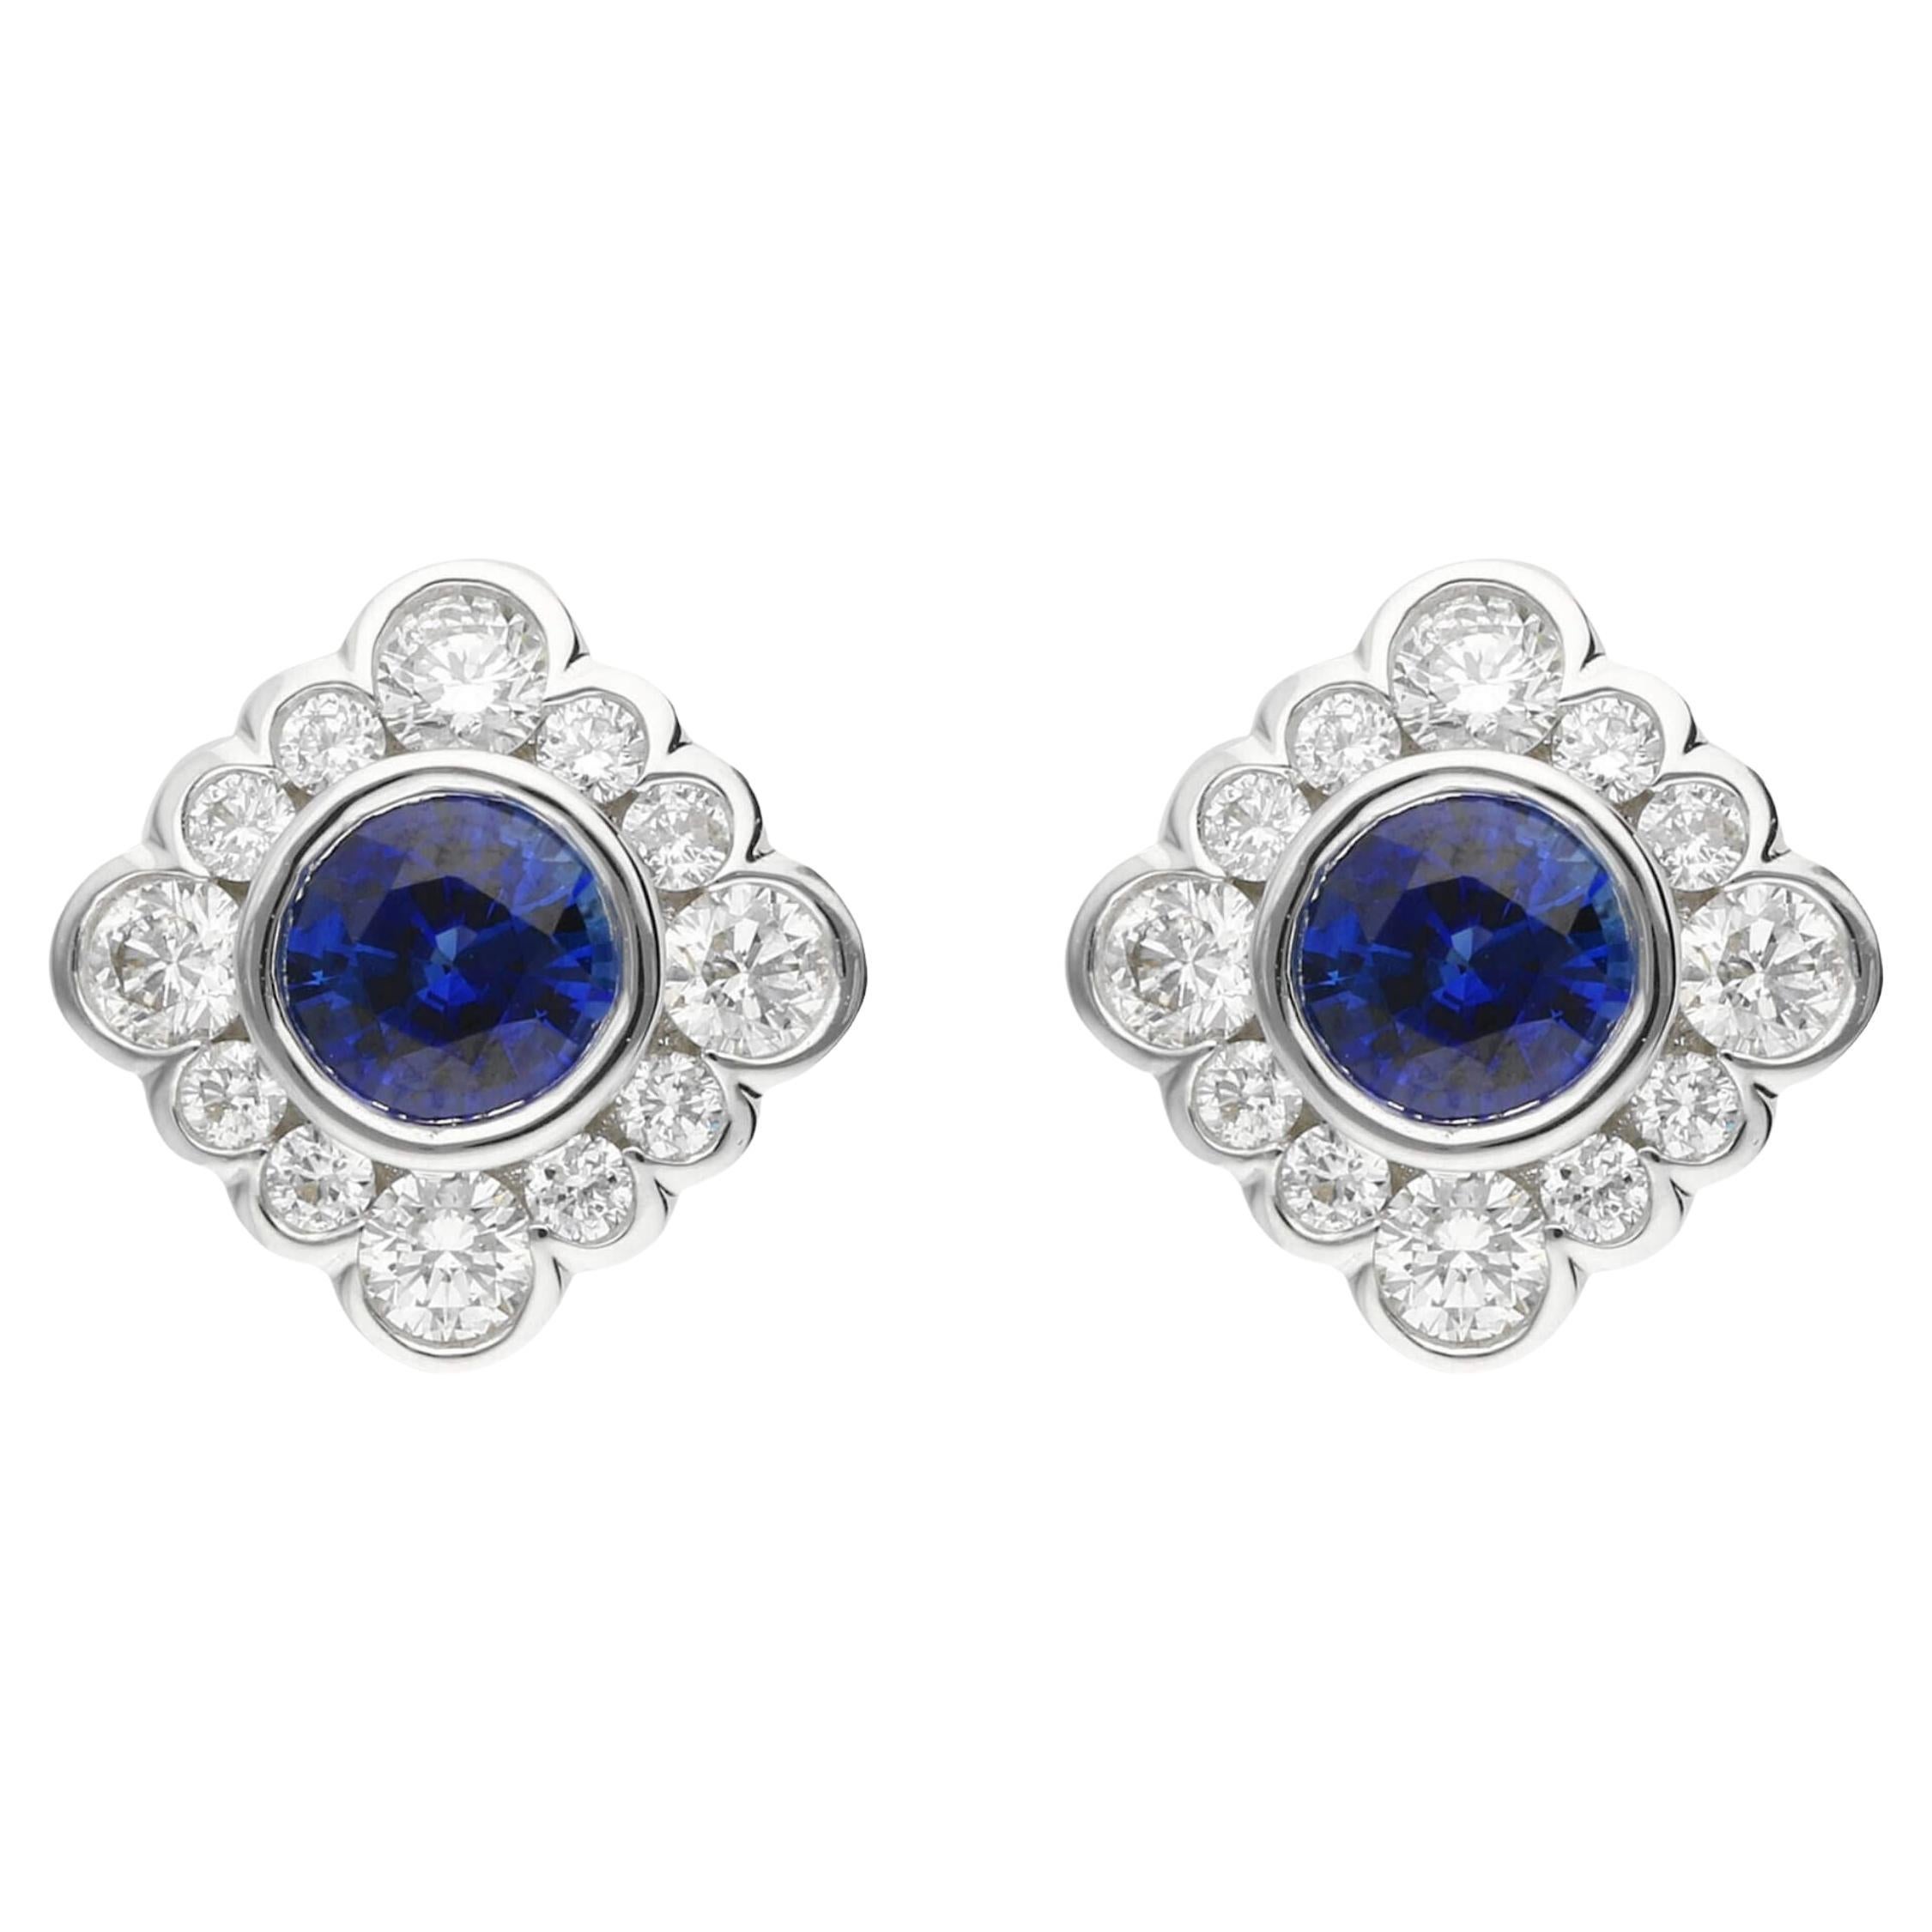 18ct White Gold 0.60ct Sapphire & 0.40ct Diamond Cluster Stud Earrings